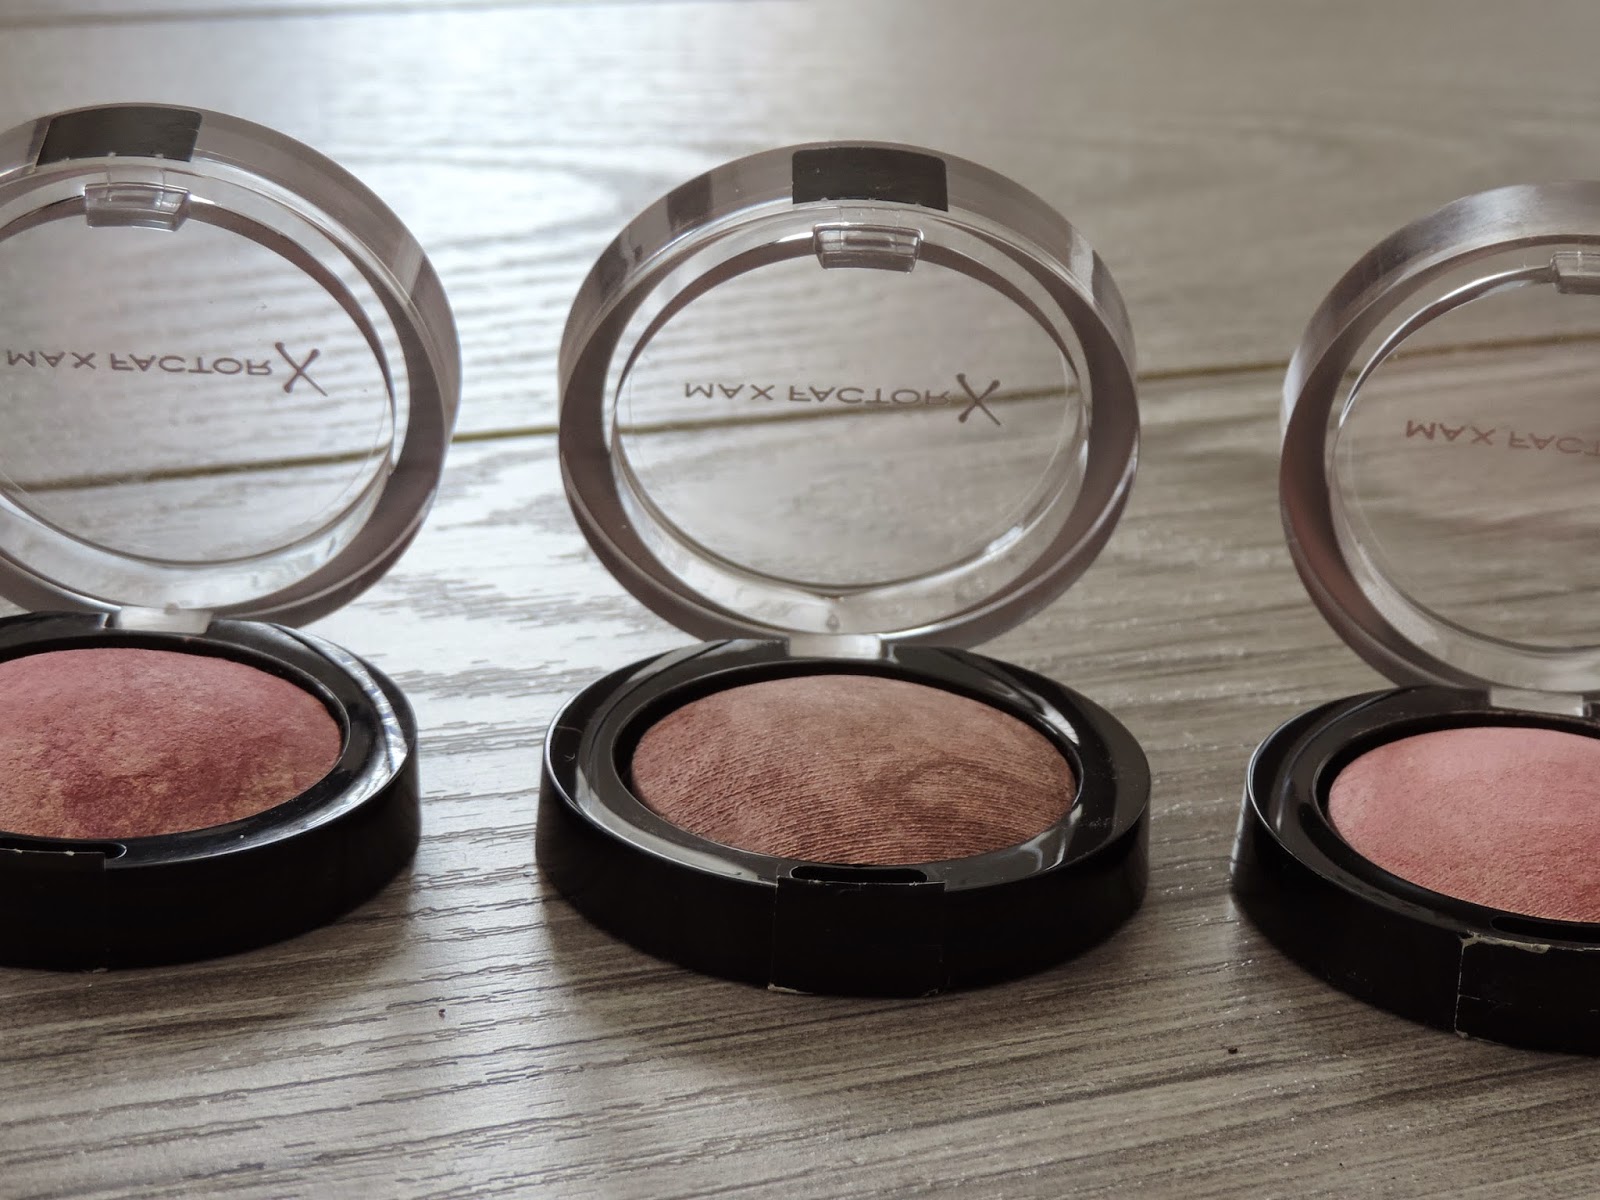 Max Factor Creme Puff Blushes (from left): Seductive Pink, Nude Mauve, Lovely Pink